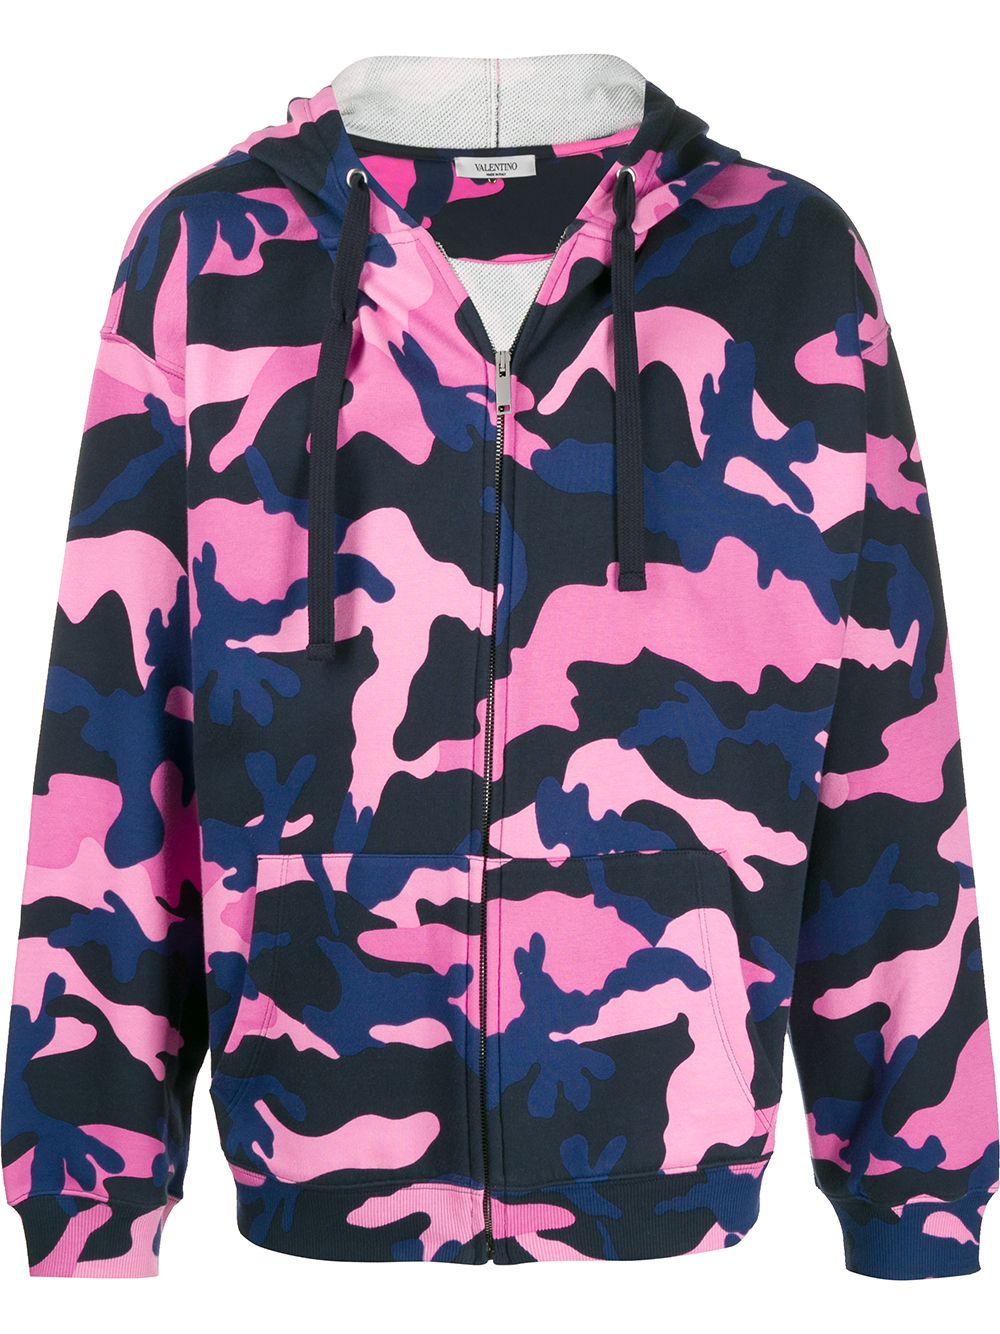 Valentino Cotton Camouflage Print Zipped Hoodie in Pink for Men - Lyst